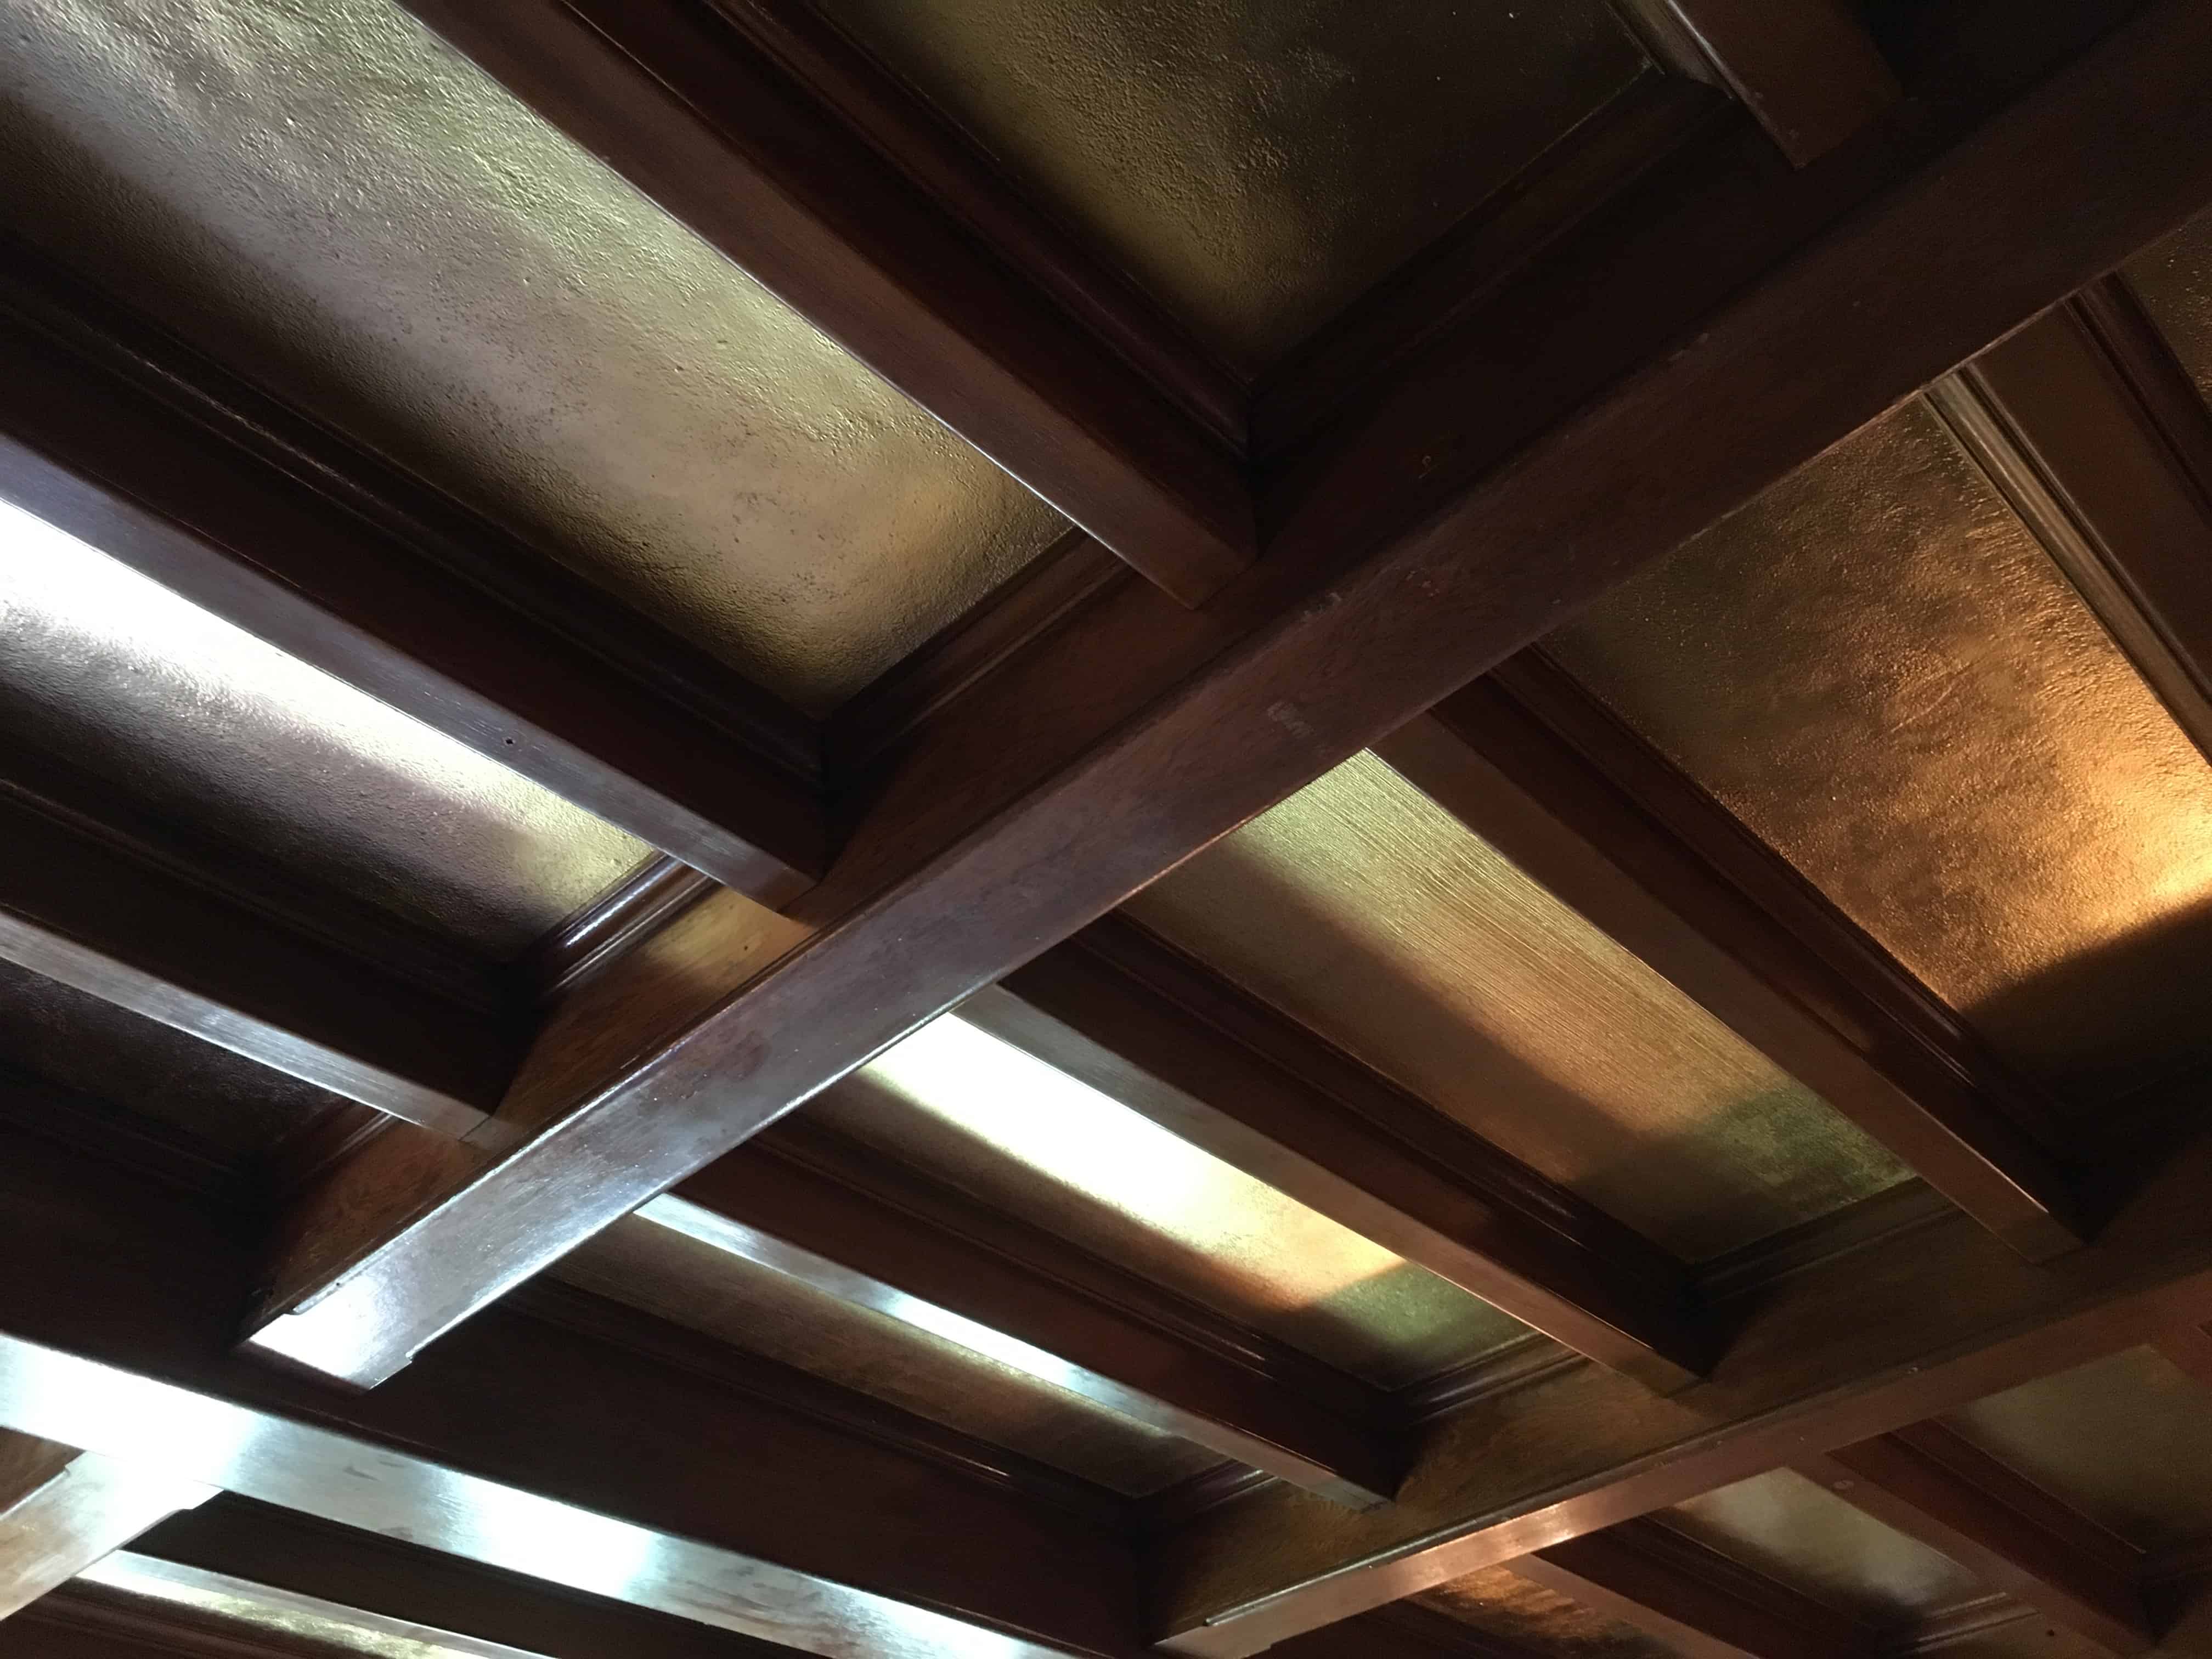 Ceiling in the dining room at the John J. Glessner House in Chicago, Illinois